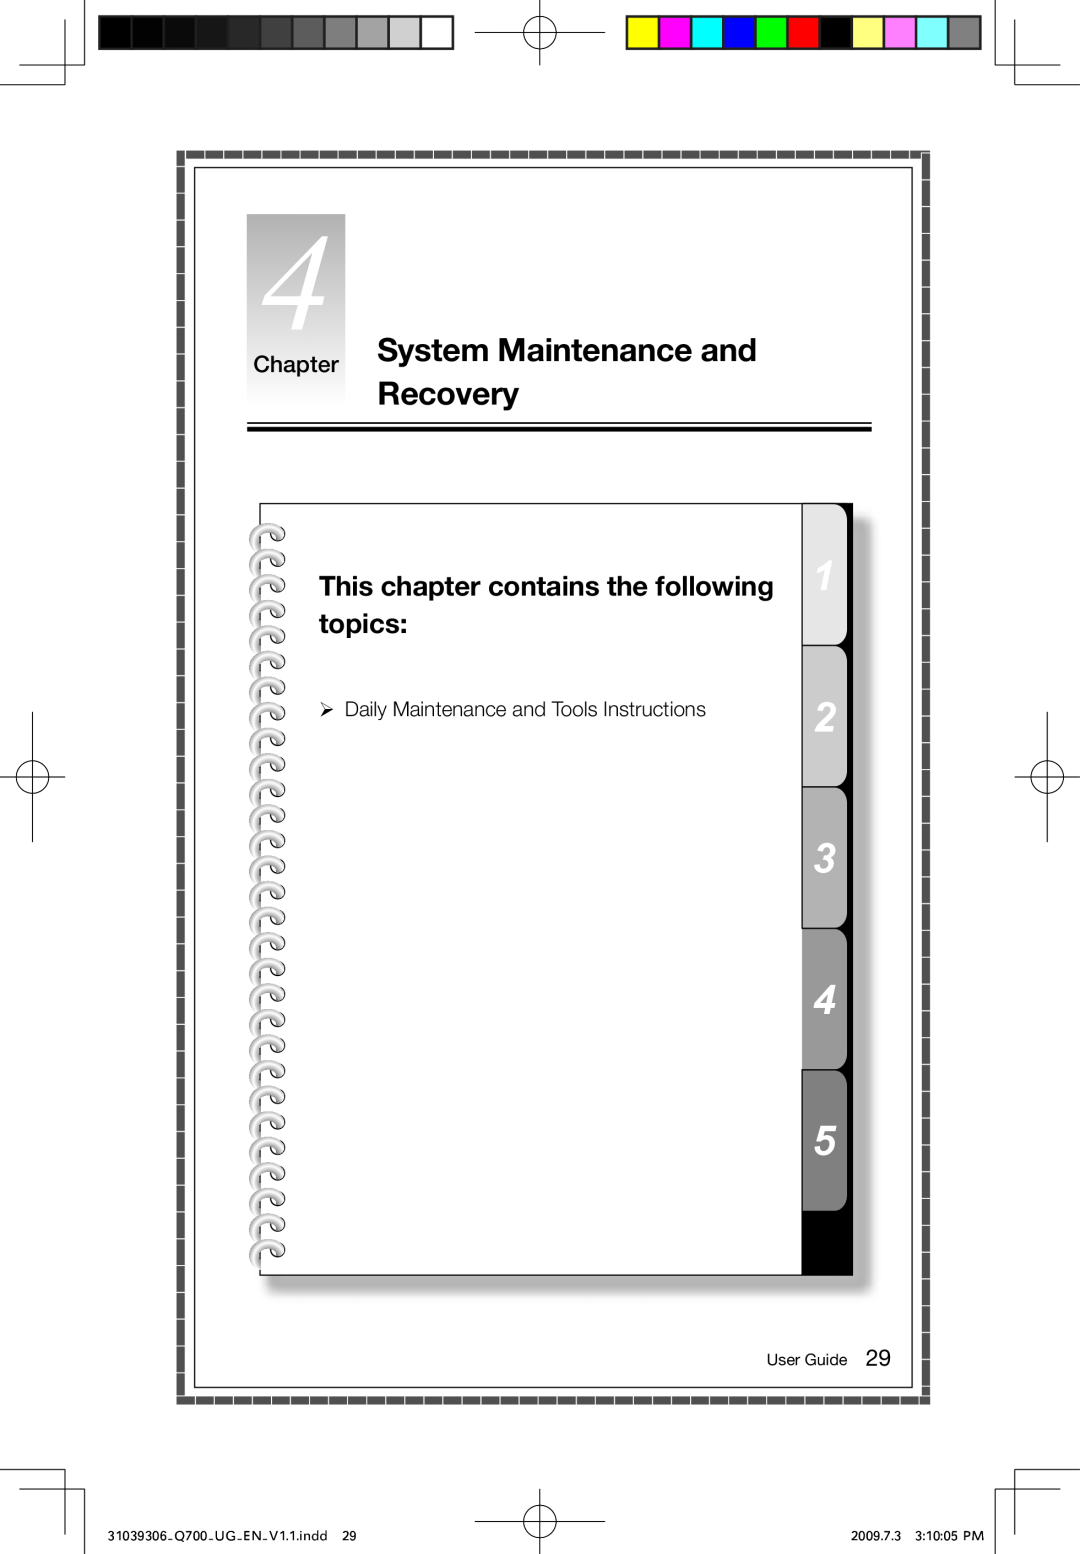 Lenovo Q700 manual System Maintenance and, Recovery, This chapter contains the following topics, Chapter, User Guide 